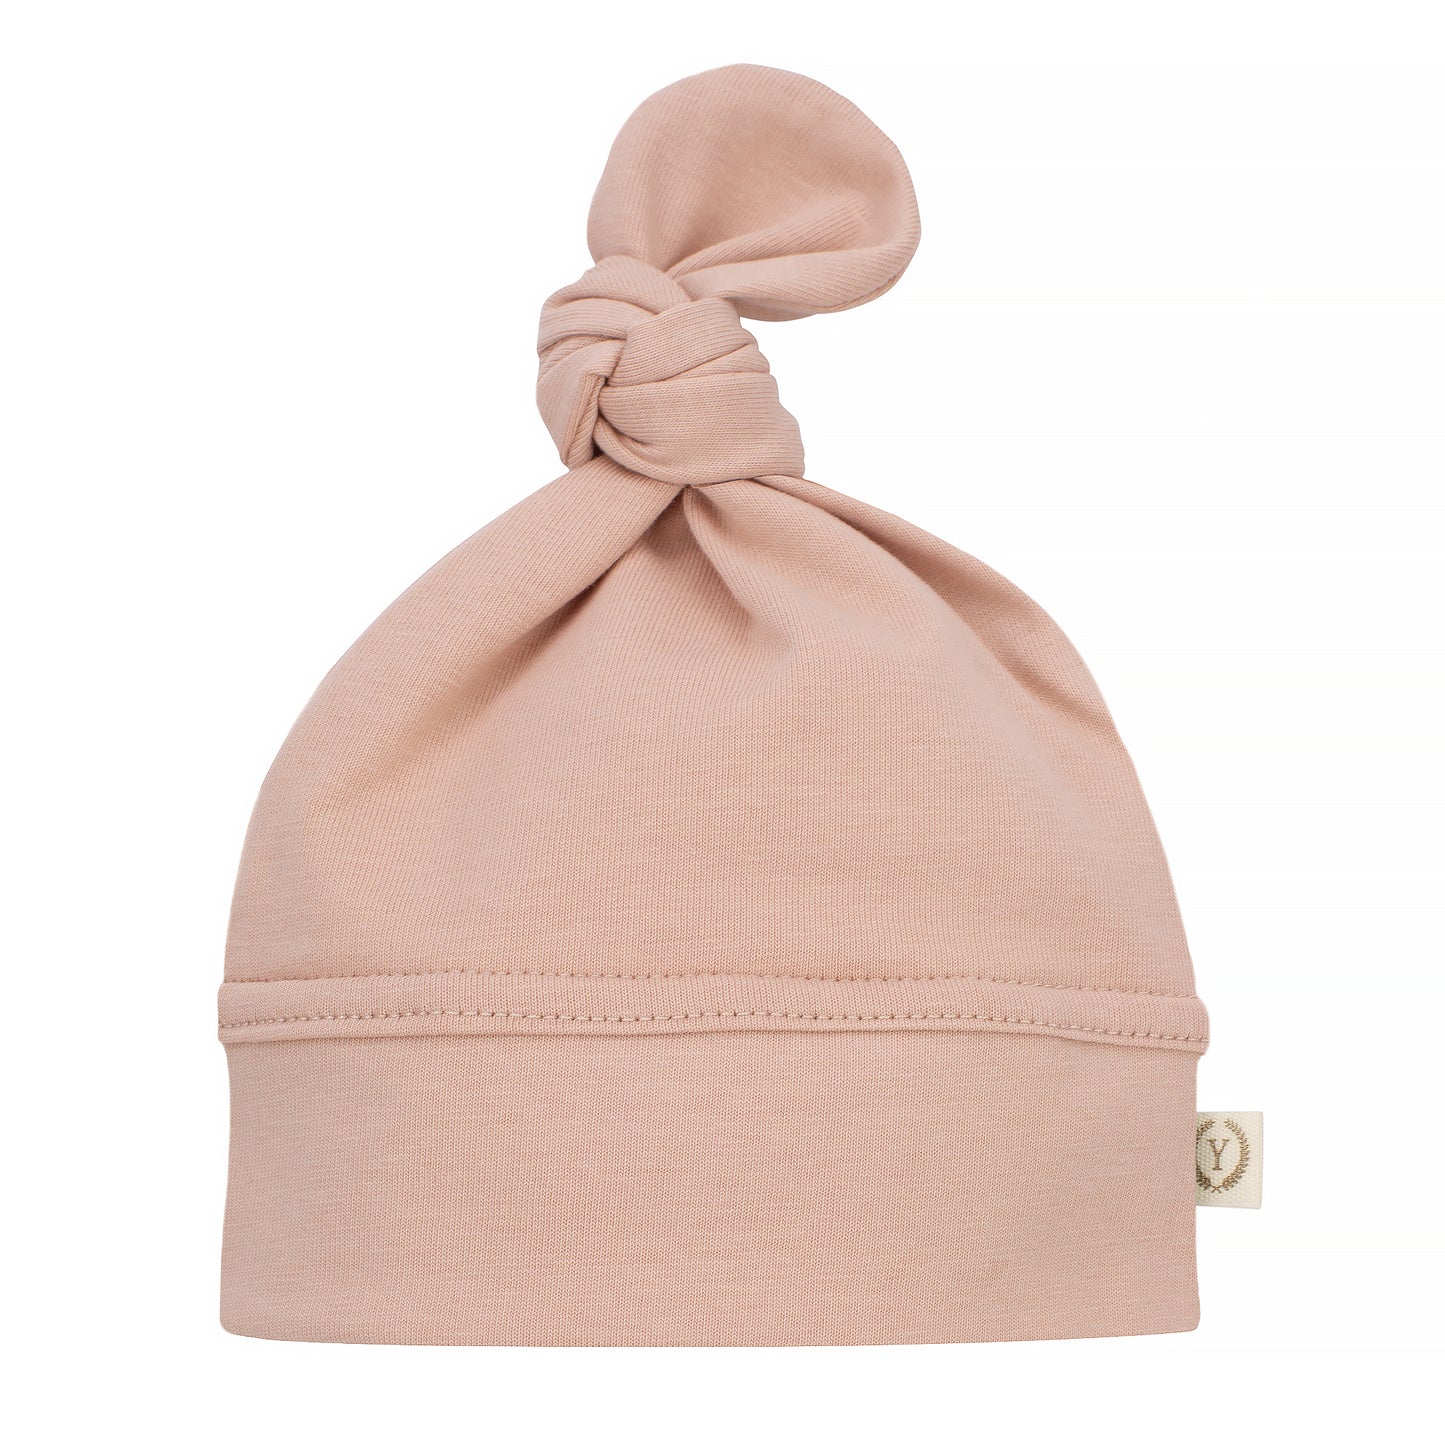 Top Knot Baby Hat SUNRISE PINK